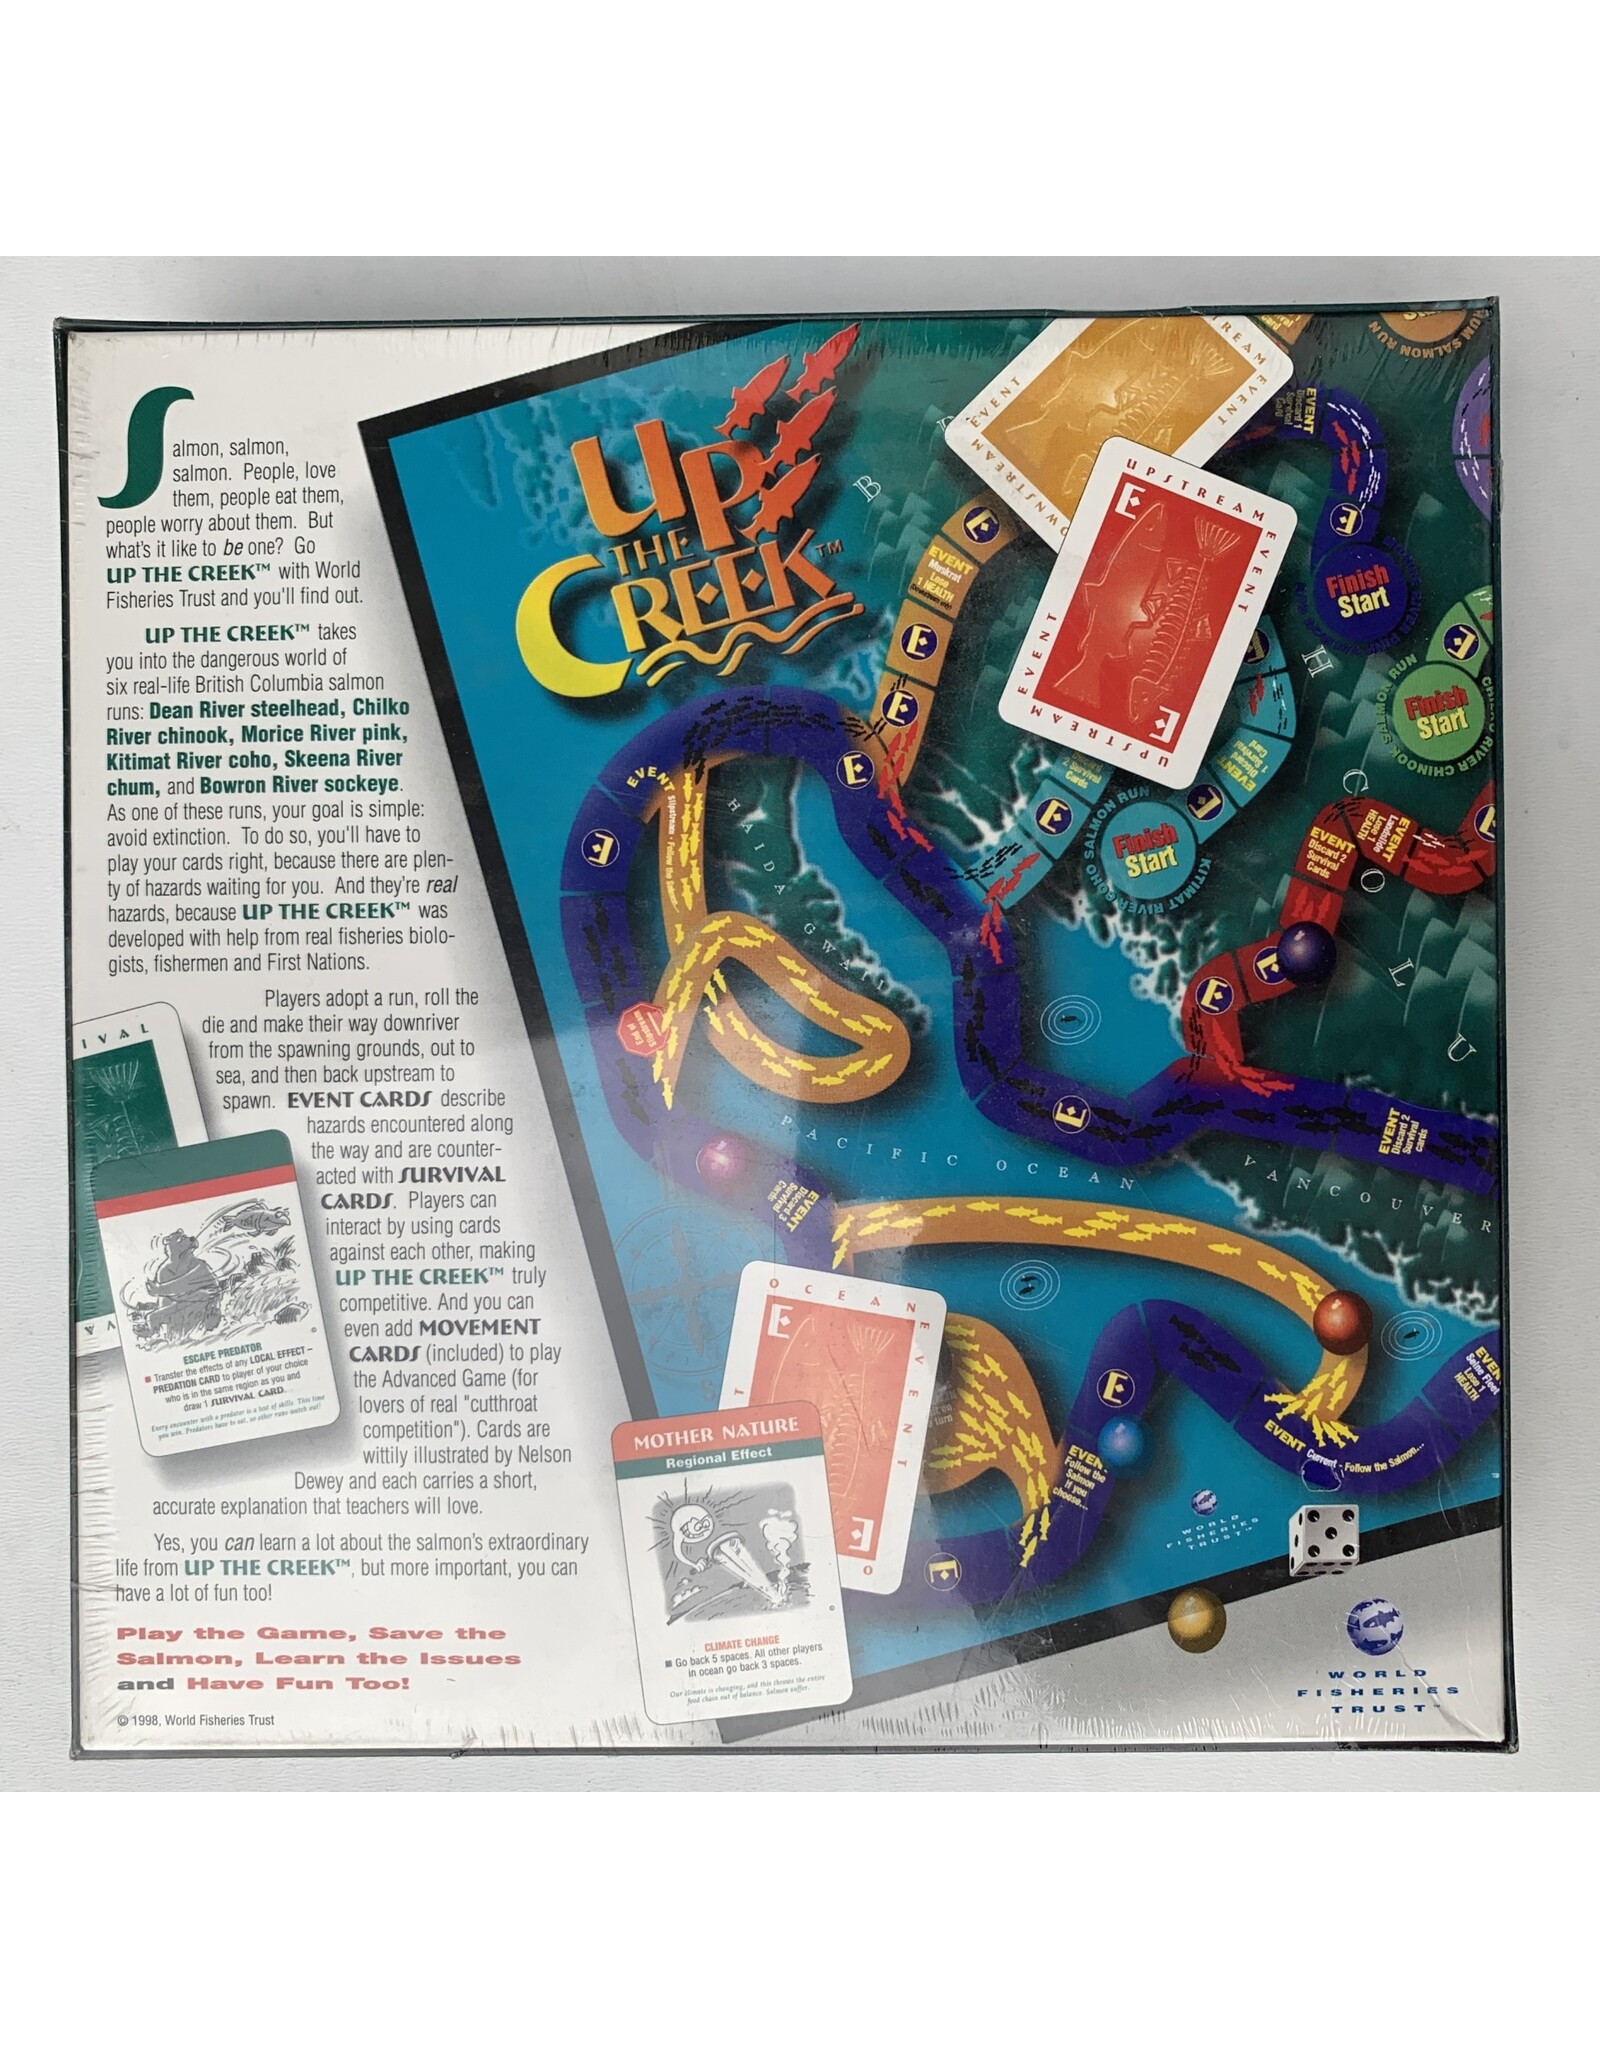 World Fisheries Trust Up the Creek; The Salmon Survival Game (1998) NIS